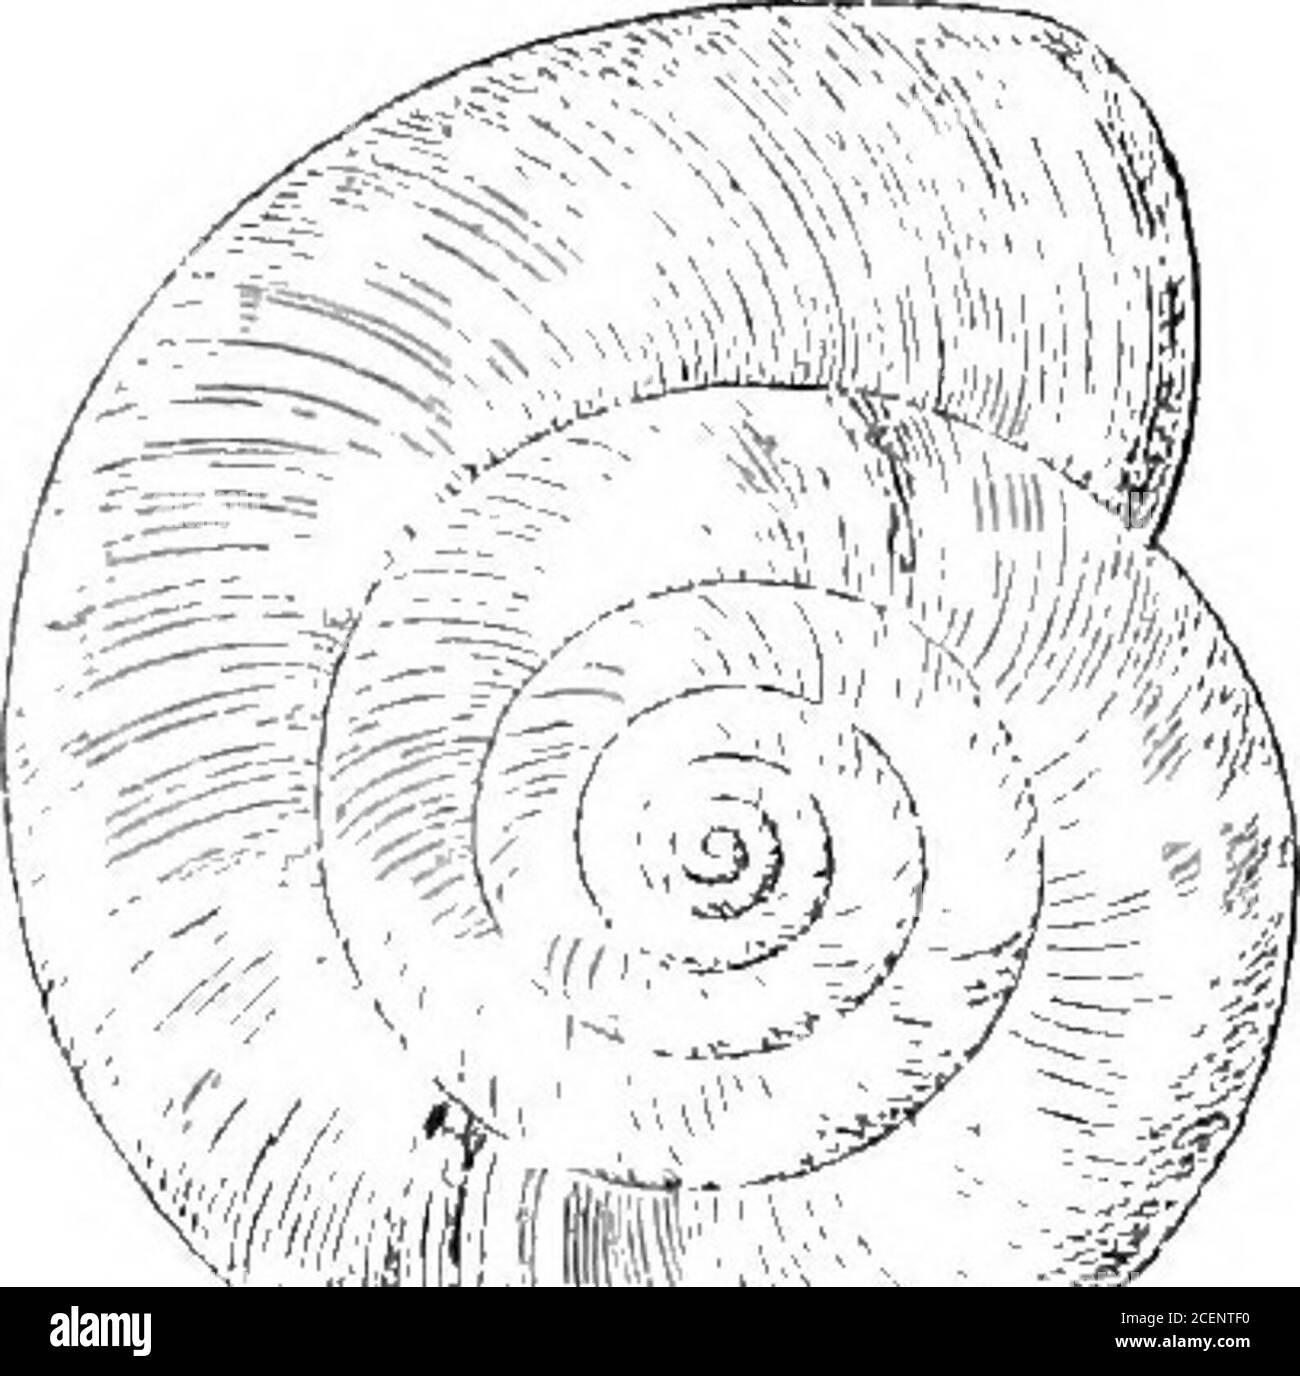 . Mollusca ... the eggs of B. montieola are about thesize of a mustard-seed, oval and greenish white. I. Eounded or subangulate at periphery. 267. Bensonia montieola, Evtton (Nanina), J. A. S. B. vii, 1,1838,p. 213 ■,H.^T. C. I. 1876, pi. 62, fig. 3; Theob. J. A. S. B. 1878,p. 142; id.ih. 1881, p. 46; Godwin-Austen, Mol. Ind. i, 1888,p. 248. 172 ZONITIDjE. Helix labiata, Pfr. P. Z. S. 1846, p. 65 ; id. Mon. Hel. i, 1848, p. 73; Tii, 1876, p. 219; H. ^- T. C. 1. 1876, pi. 27, fig. 5; Qodwin-^Austin, t. c. 1888, p. 247, pi. 61, fig. 5 (anatomy).Nanina (Bensonia) monticola, var. murriensis, Nev. Stock Photo